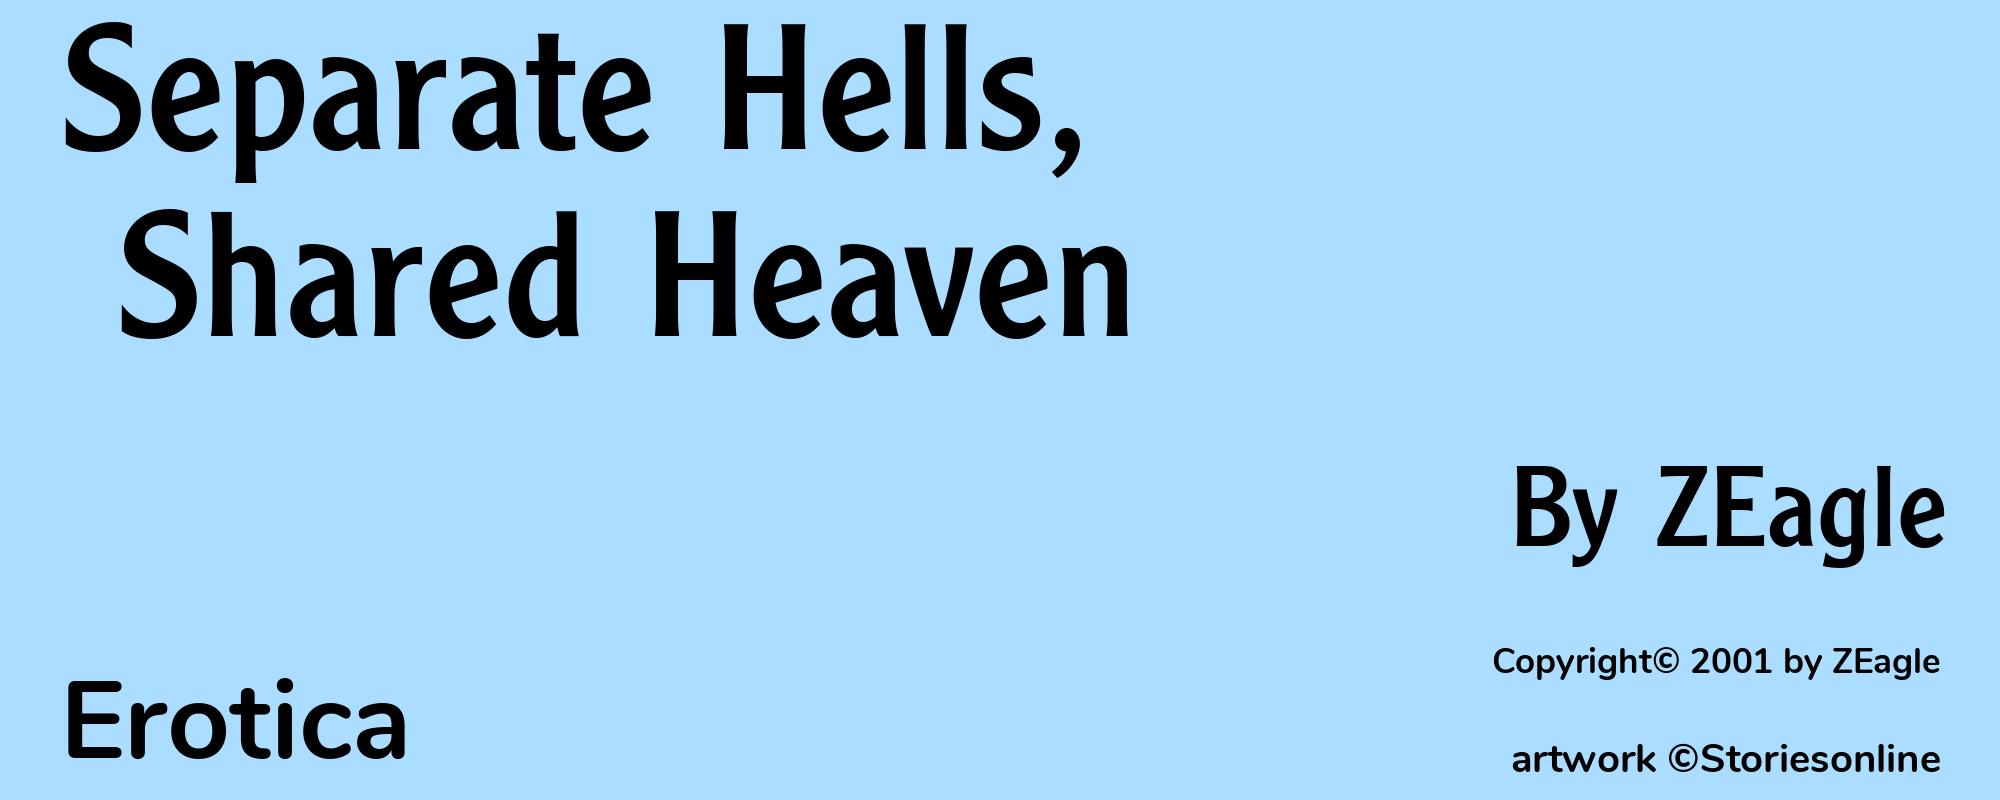 Separate Hells, Shared Heaven - Cover